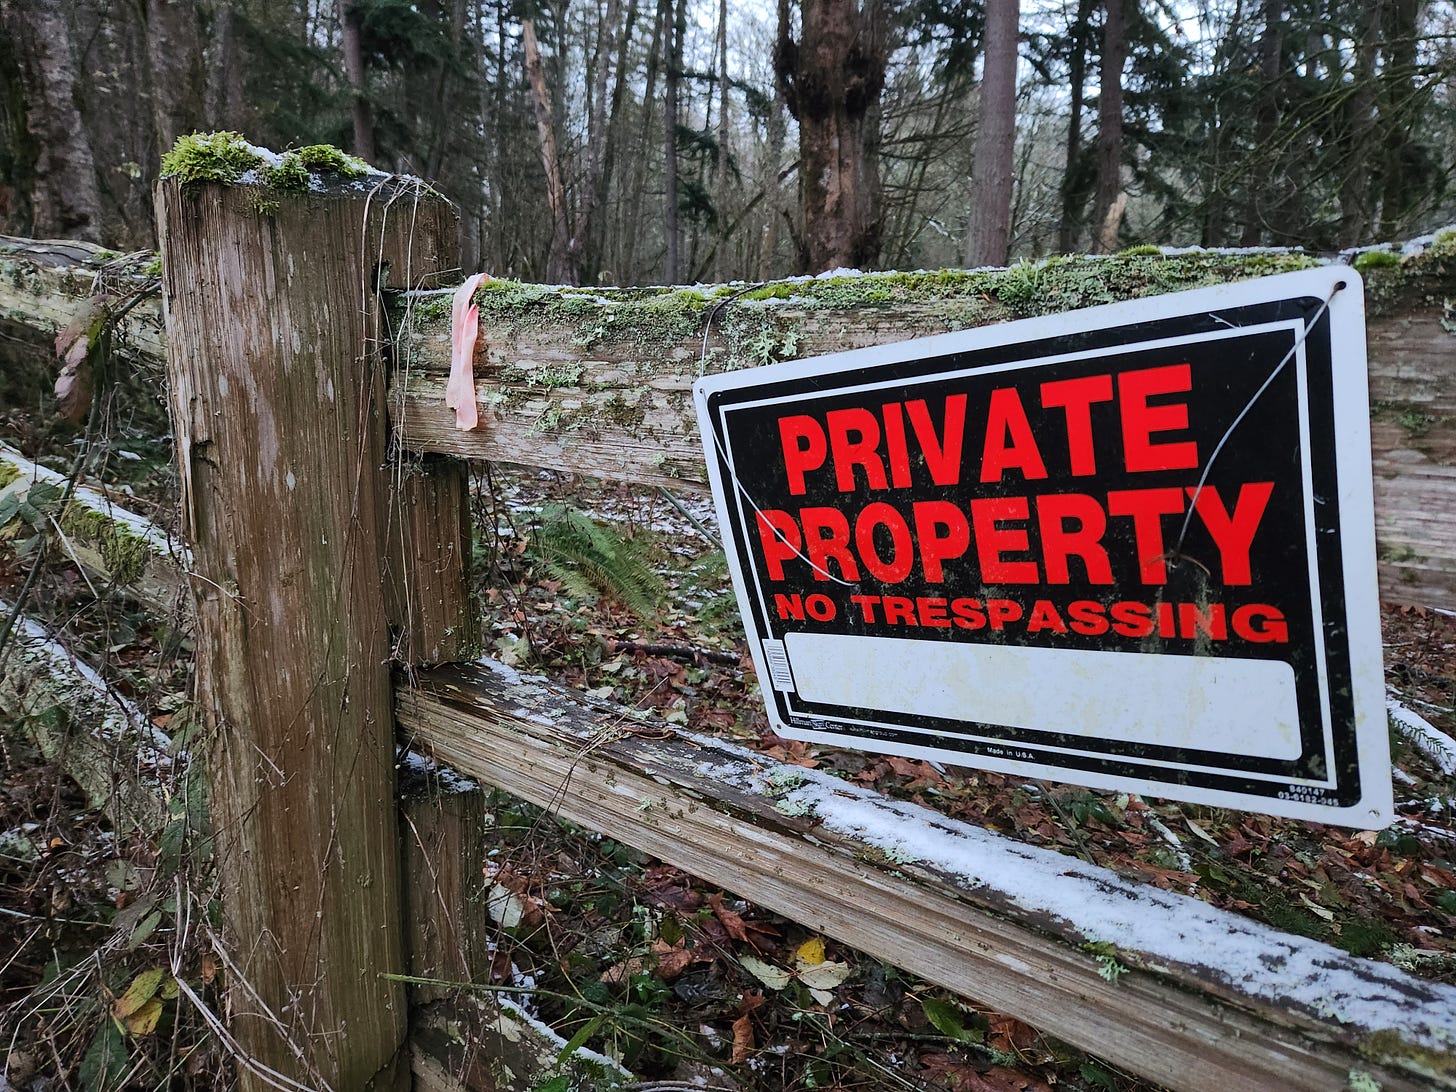 a private property no trespassing sign on a wooden fence